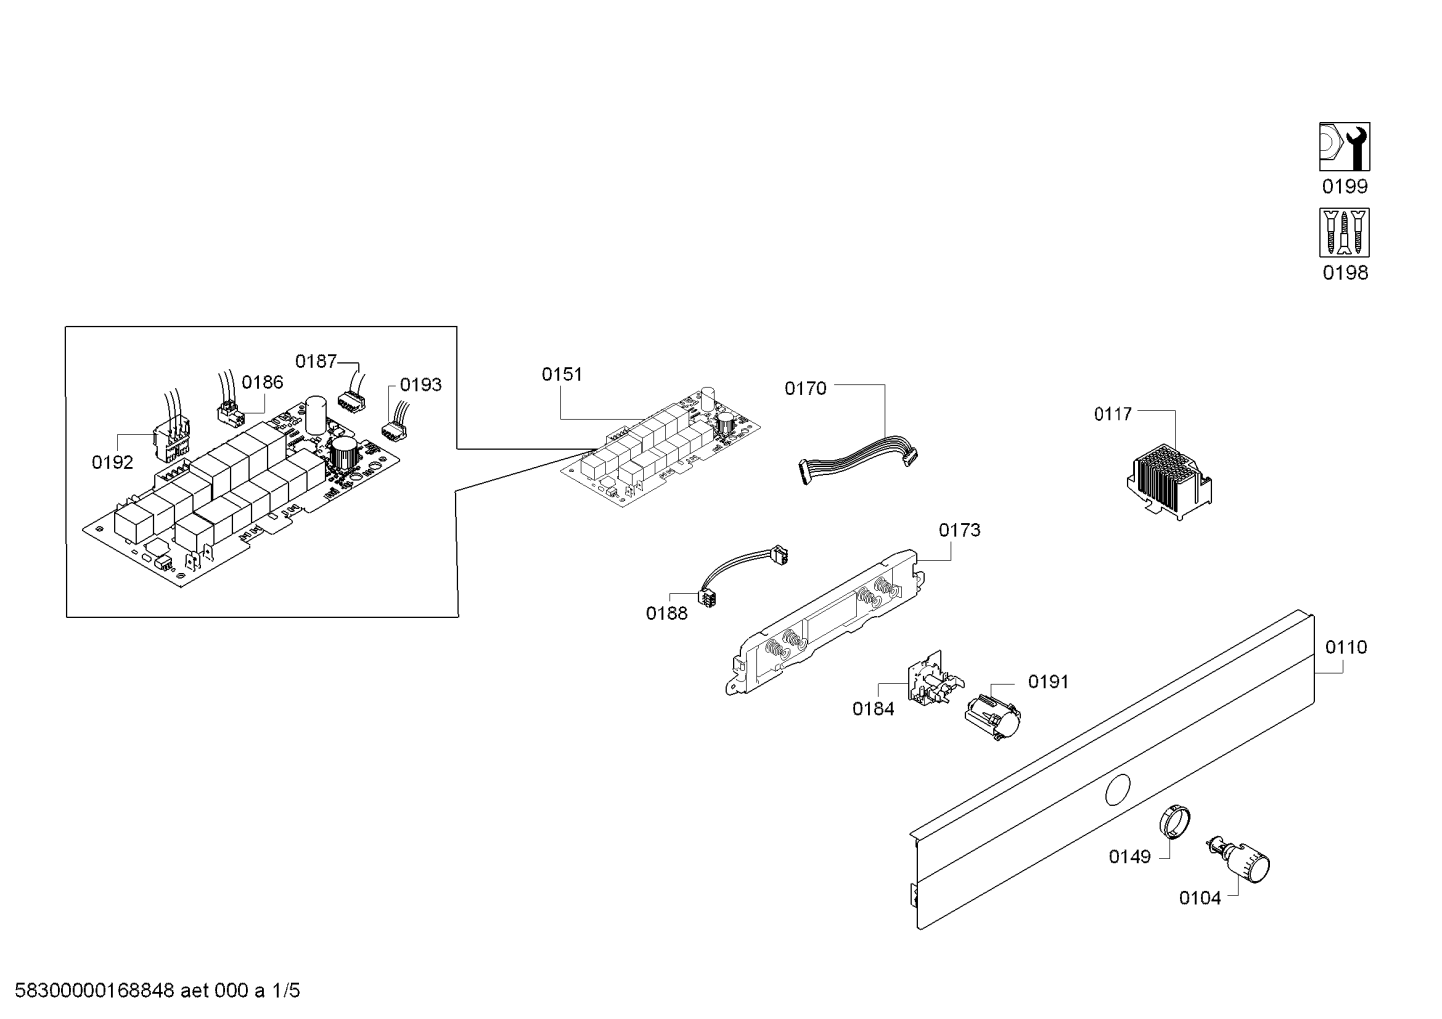 drawing_link_1_device_1824688